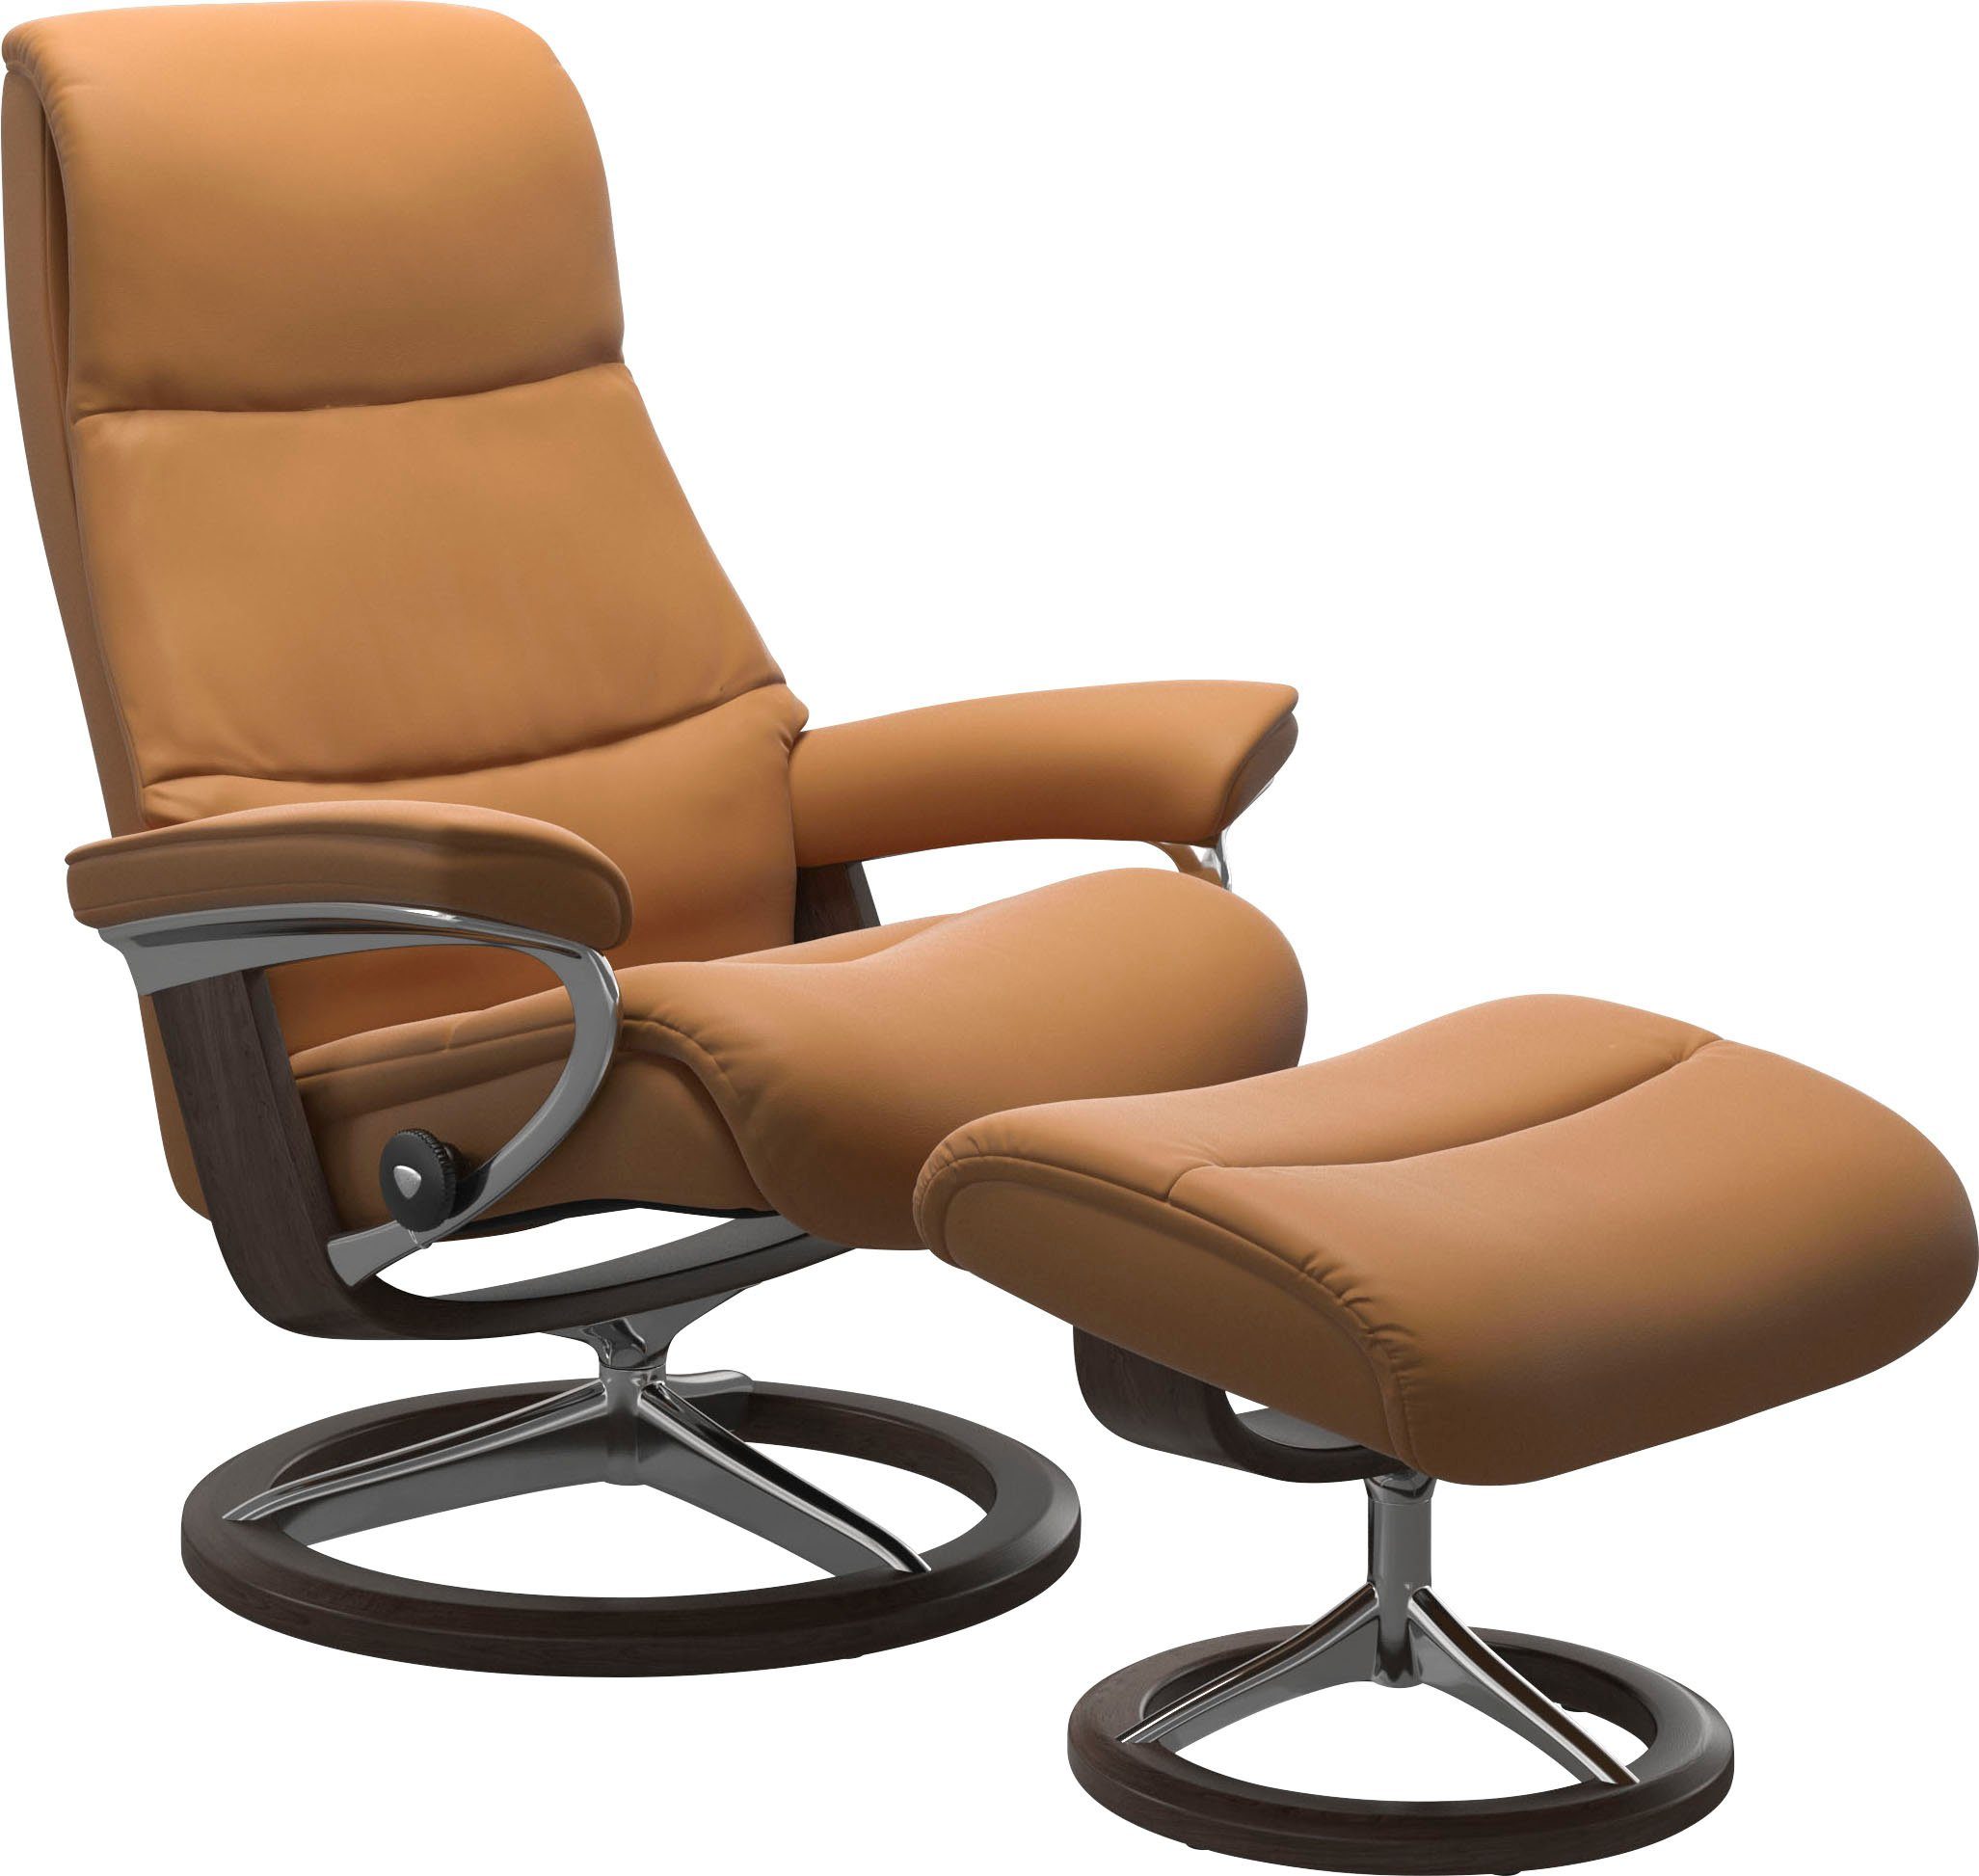 Relaxsessel L,Gestell Größe mit Wenge View, Signature Stressless® Base,